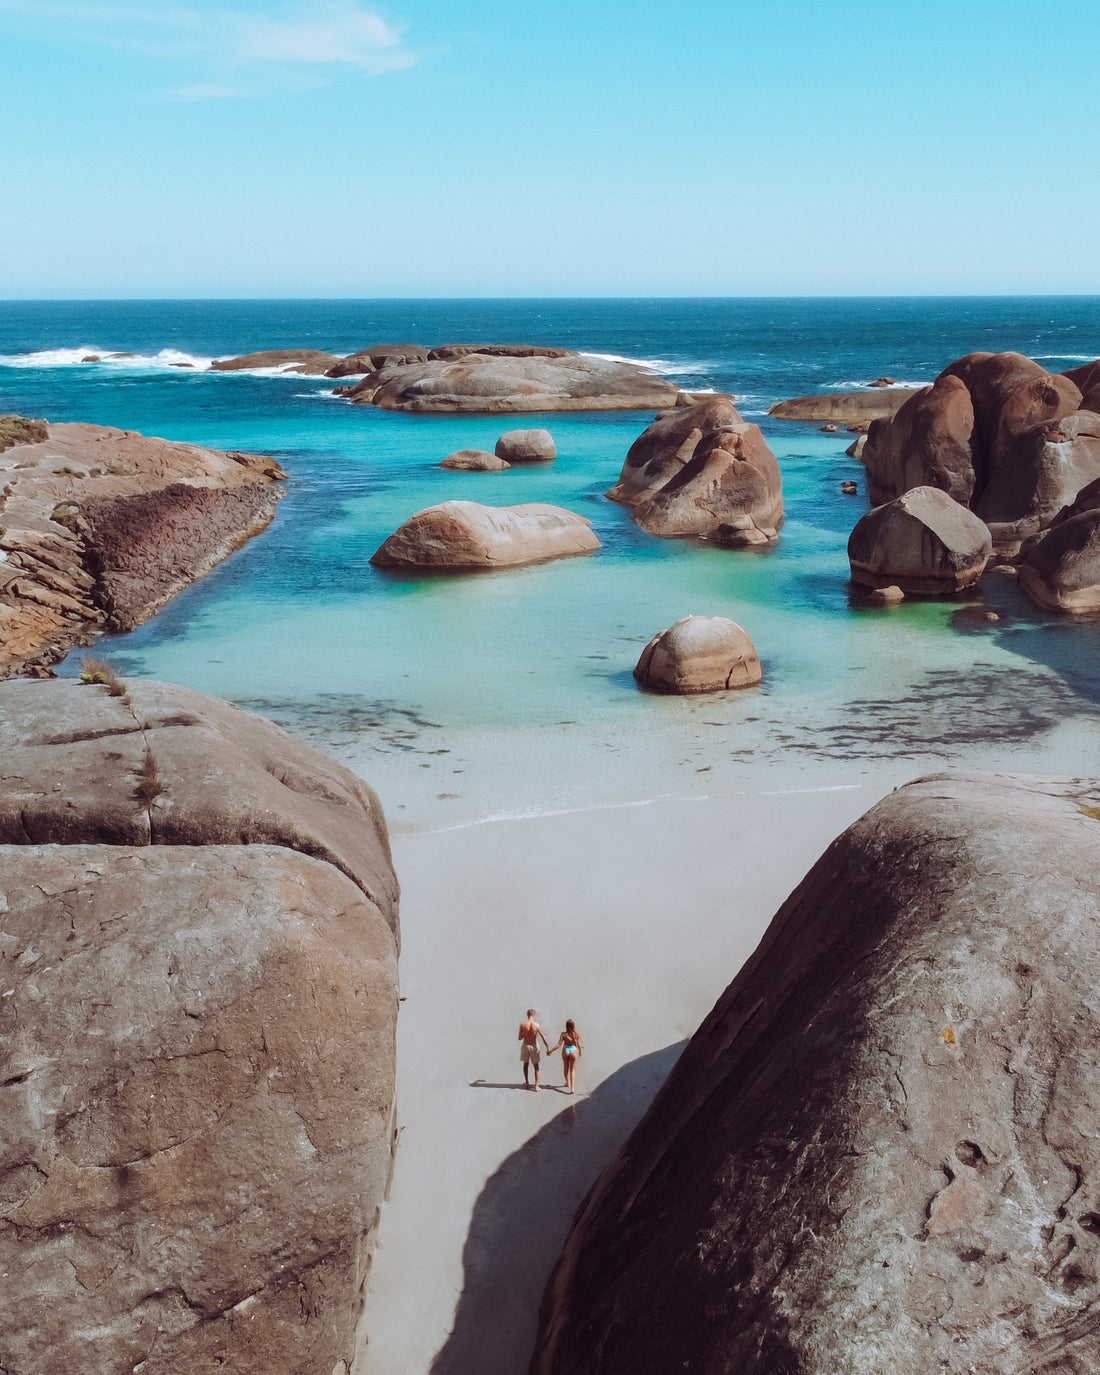 The best spots in the South West of Australia